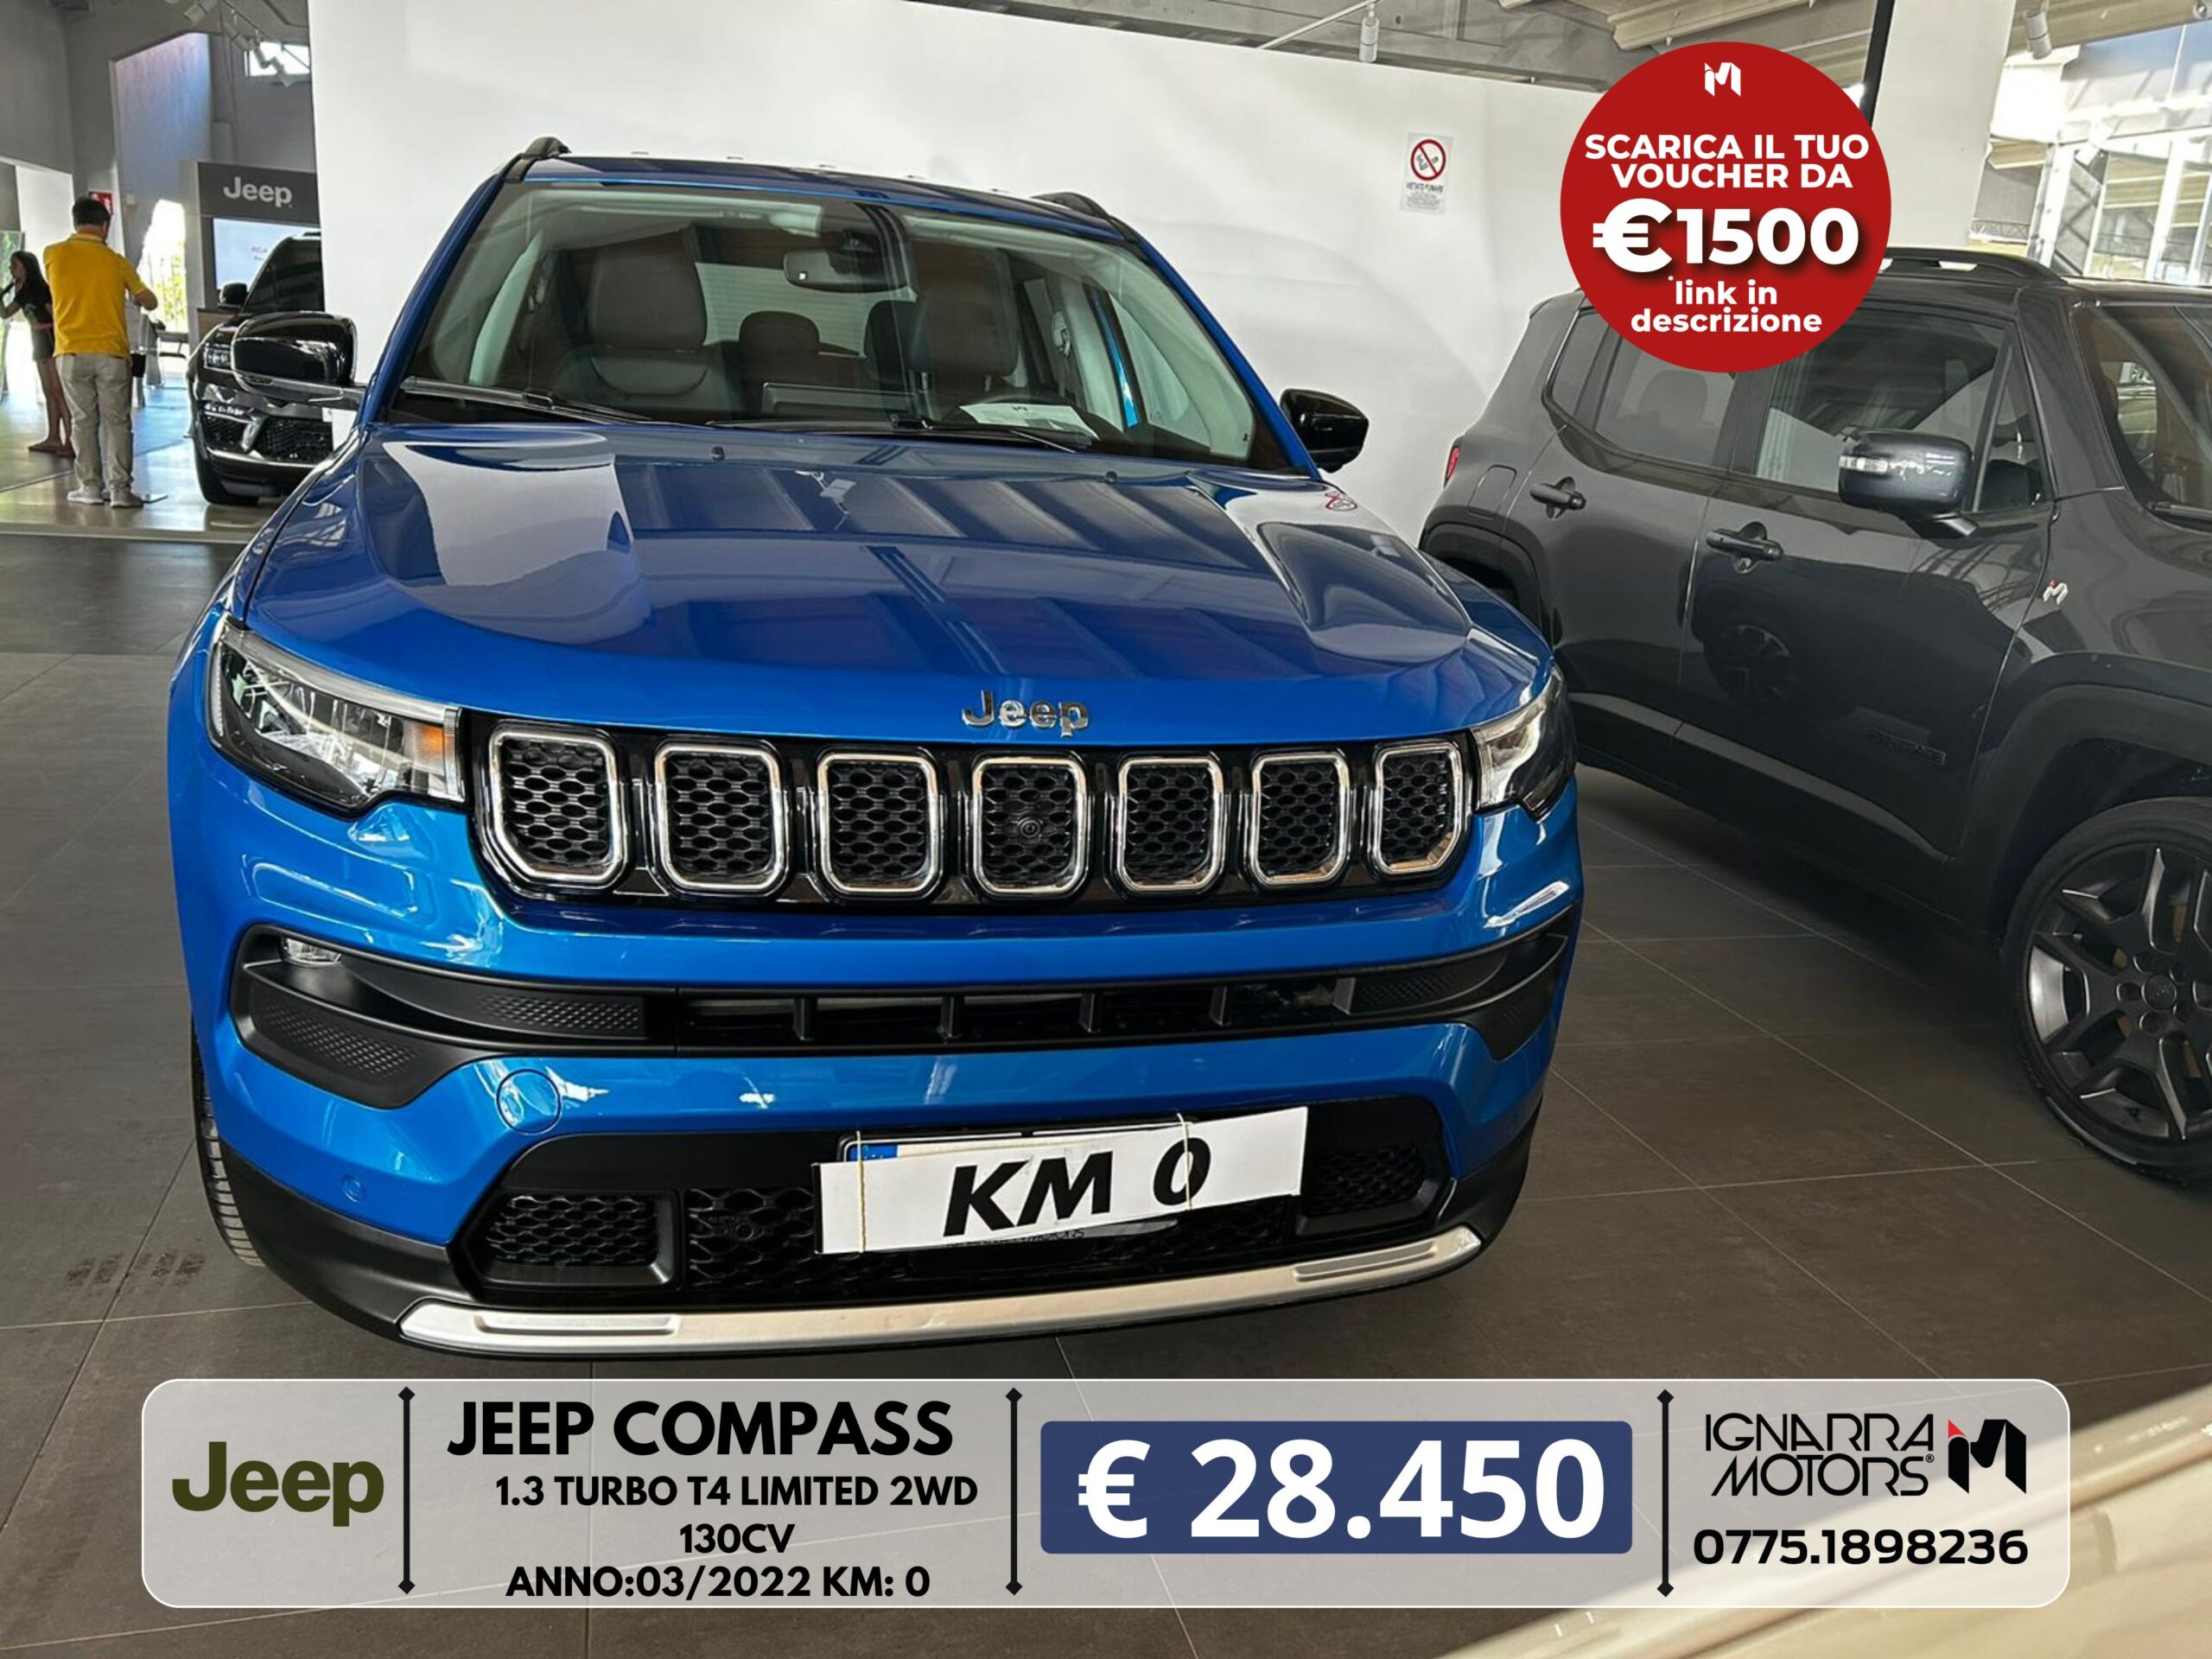 Jeep Compass 1.3 TURBO T4 LIMITED 2WD 130CV